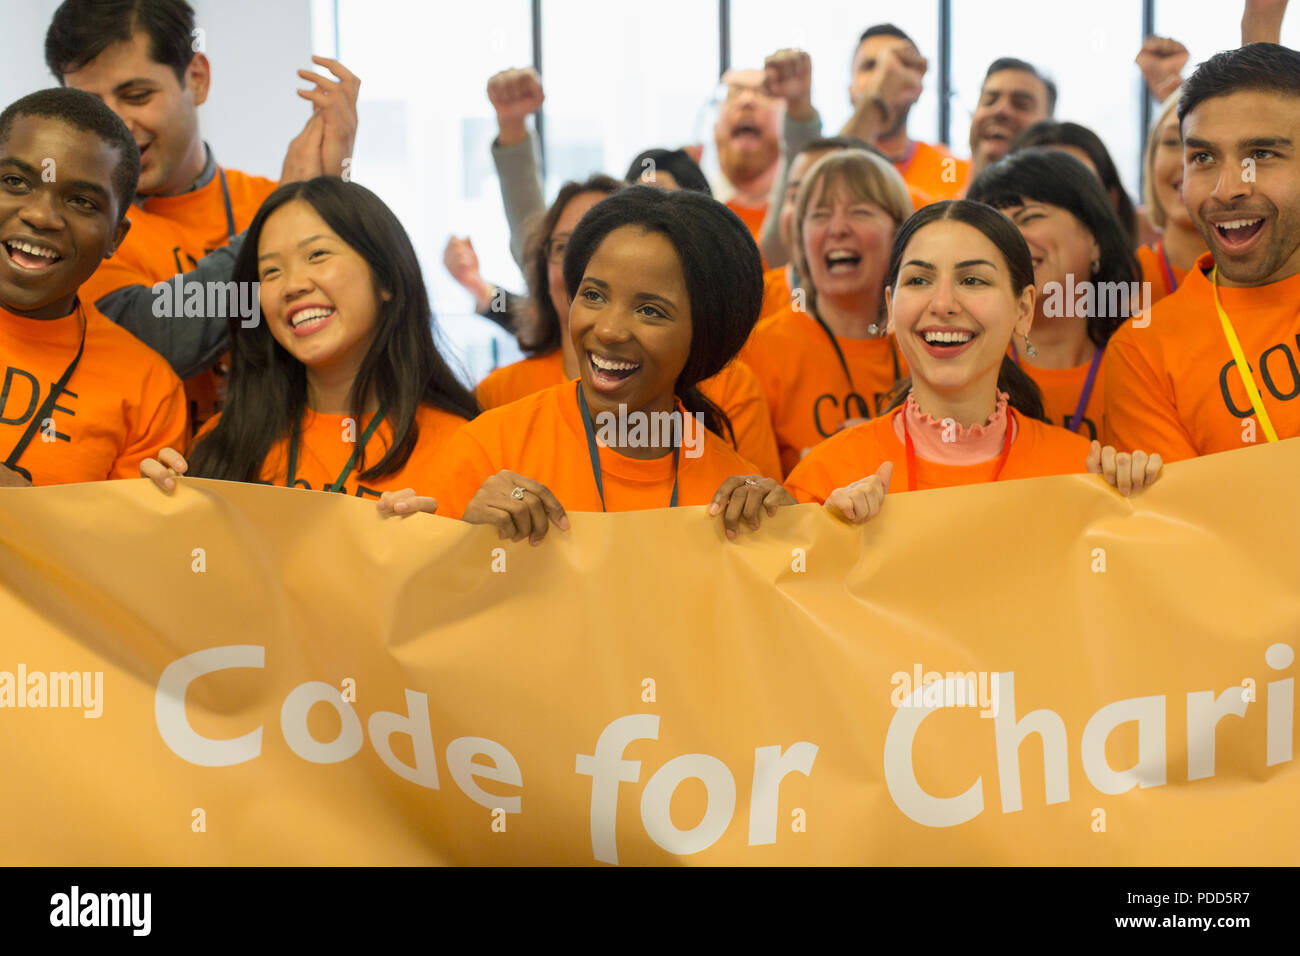 Happy hackers with banner coding for charity at hackathon Stock Photo